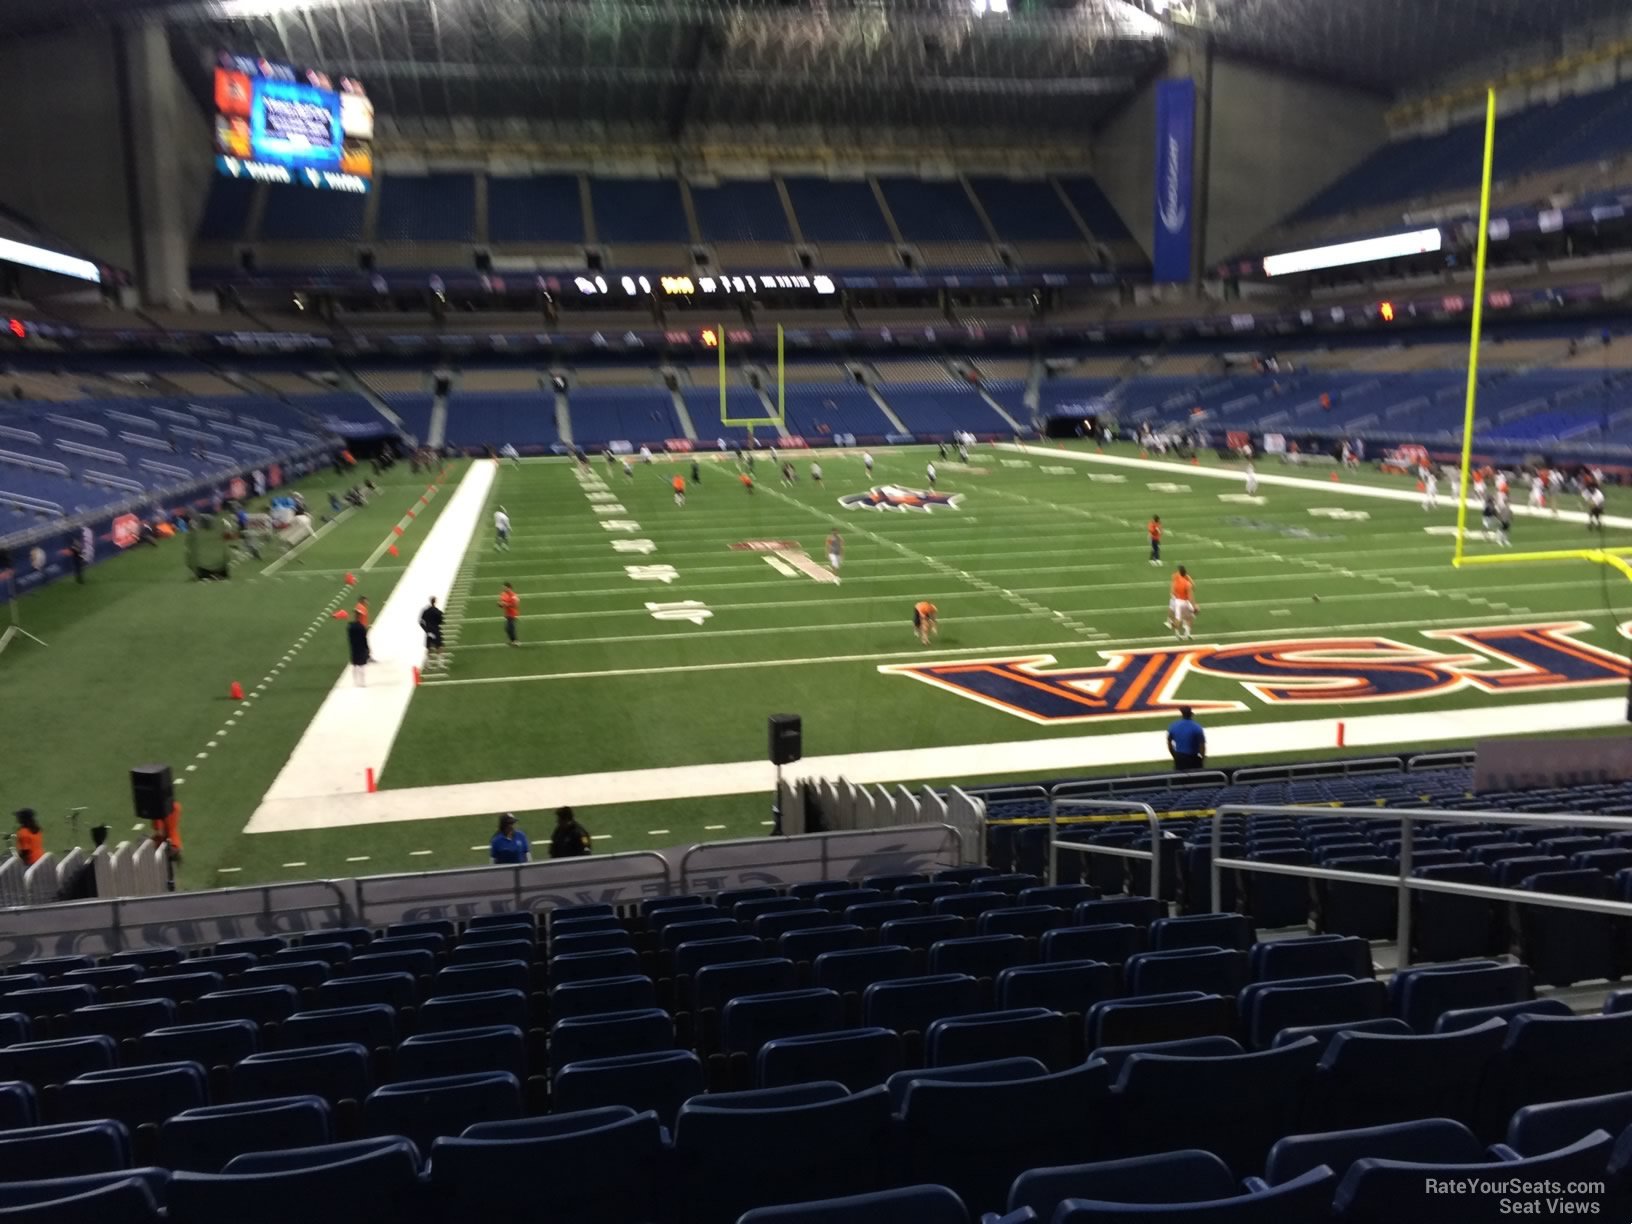 section 125, row 18 seat view  for football - alamodome